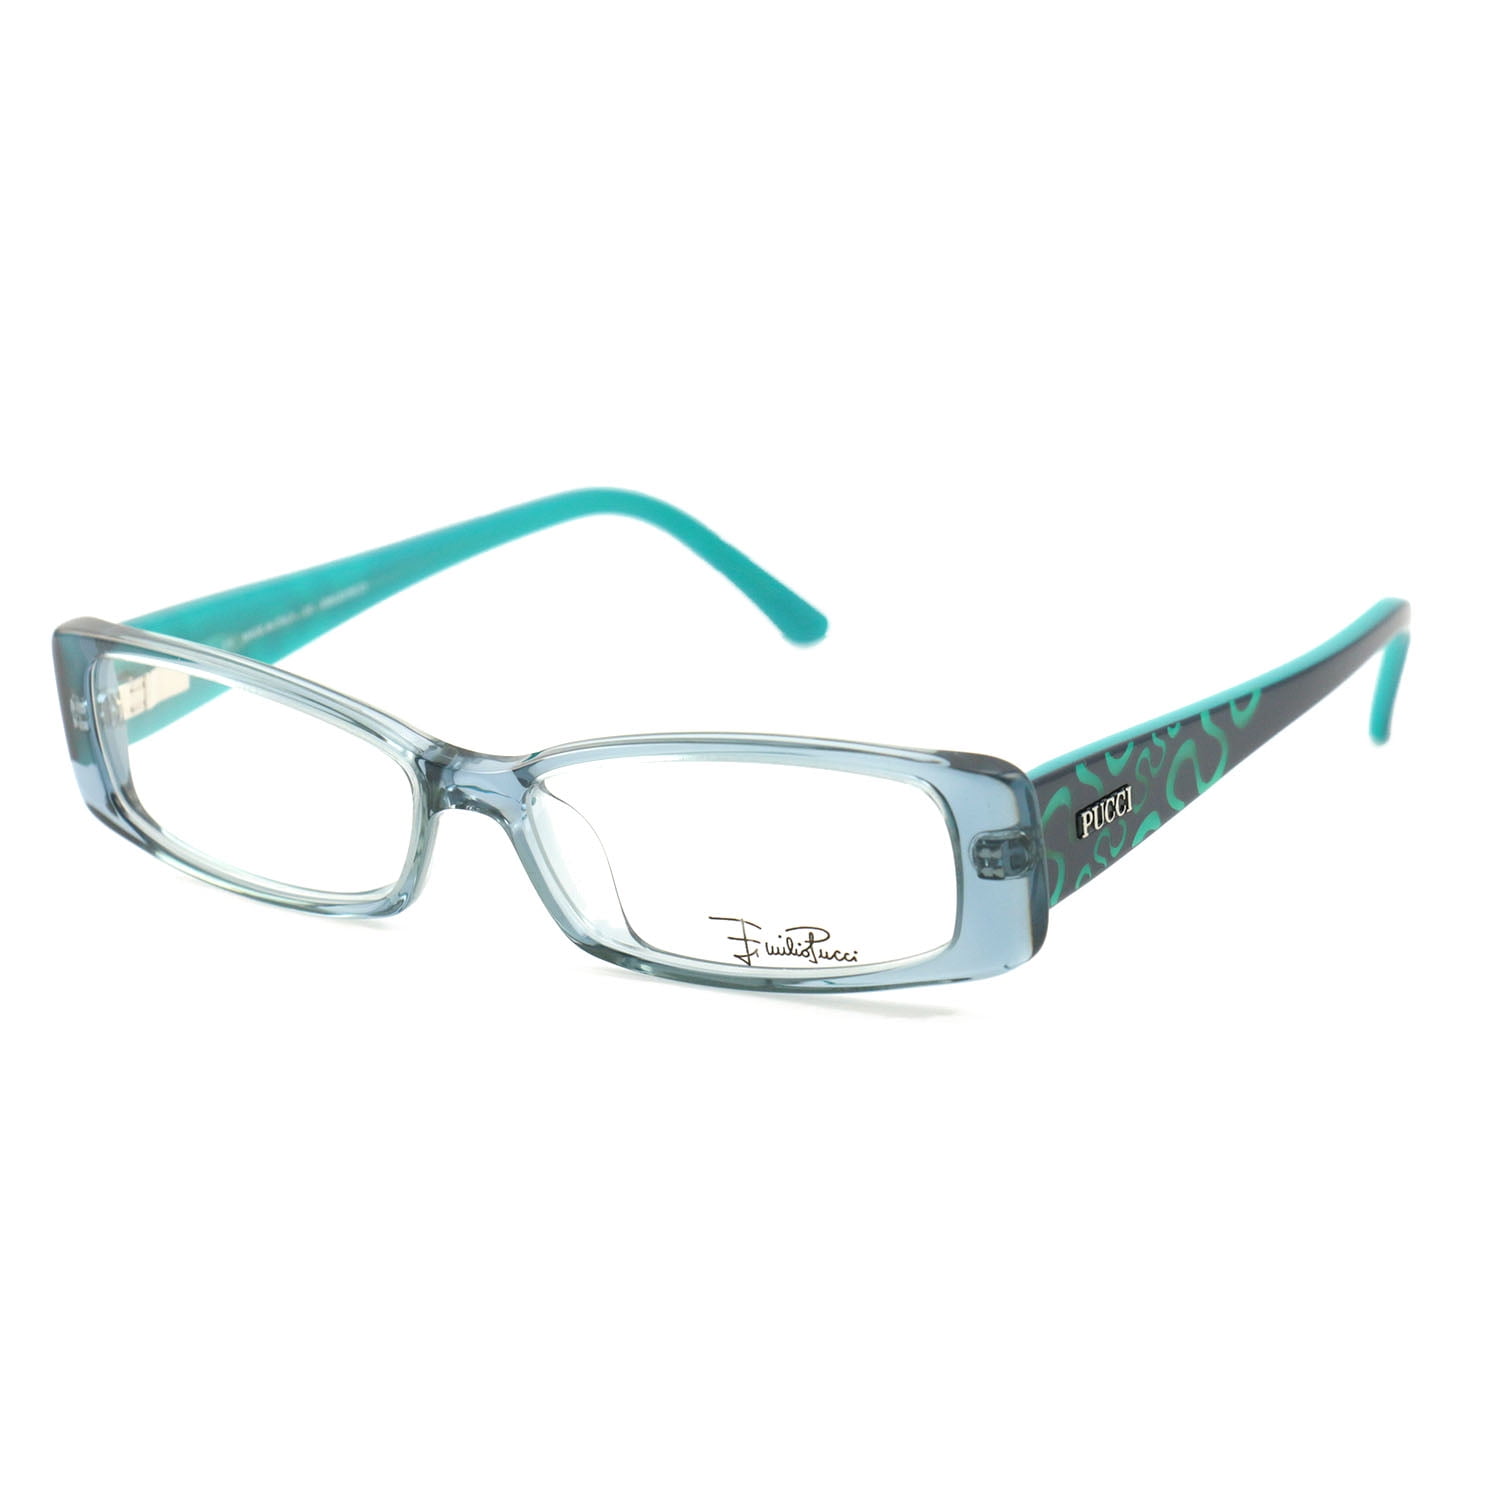 Emilio Pucci Womens Eyeglasses EP2655 Clear Blue Turquoise 51 14 135  Rectangle